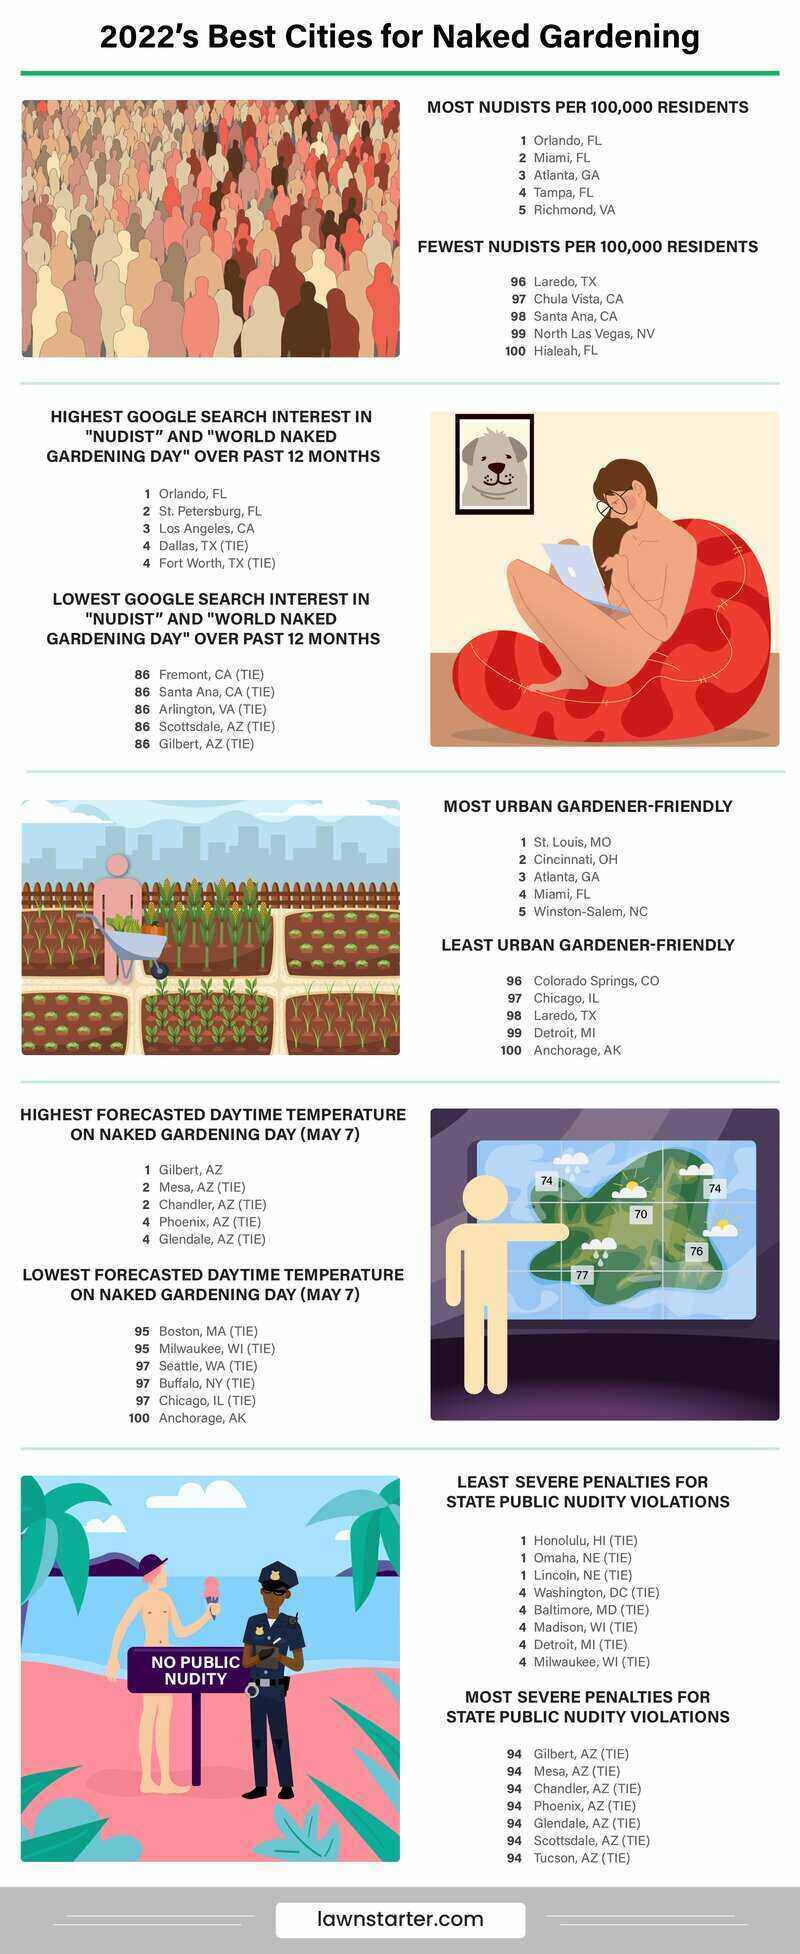 Infographic showing the best cities for naked gardening, a ranking based on the size of the nudist population, legality of public nudity and toplessness, gardening-friendliness, climate, safety, and more